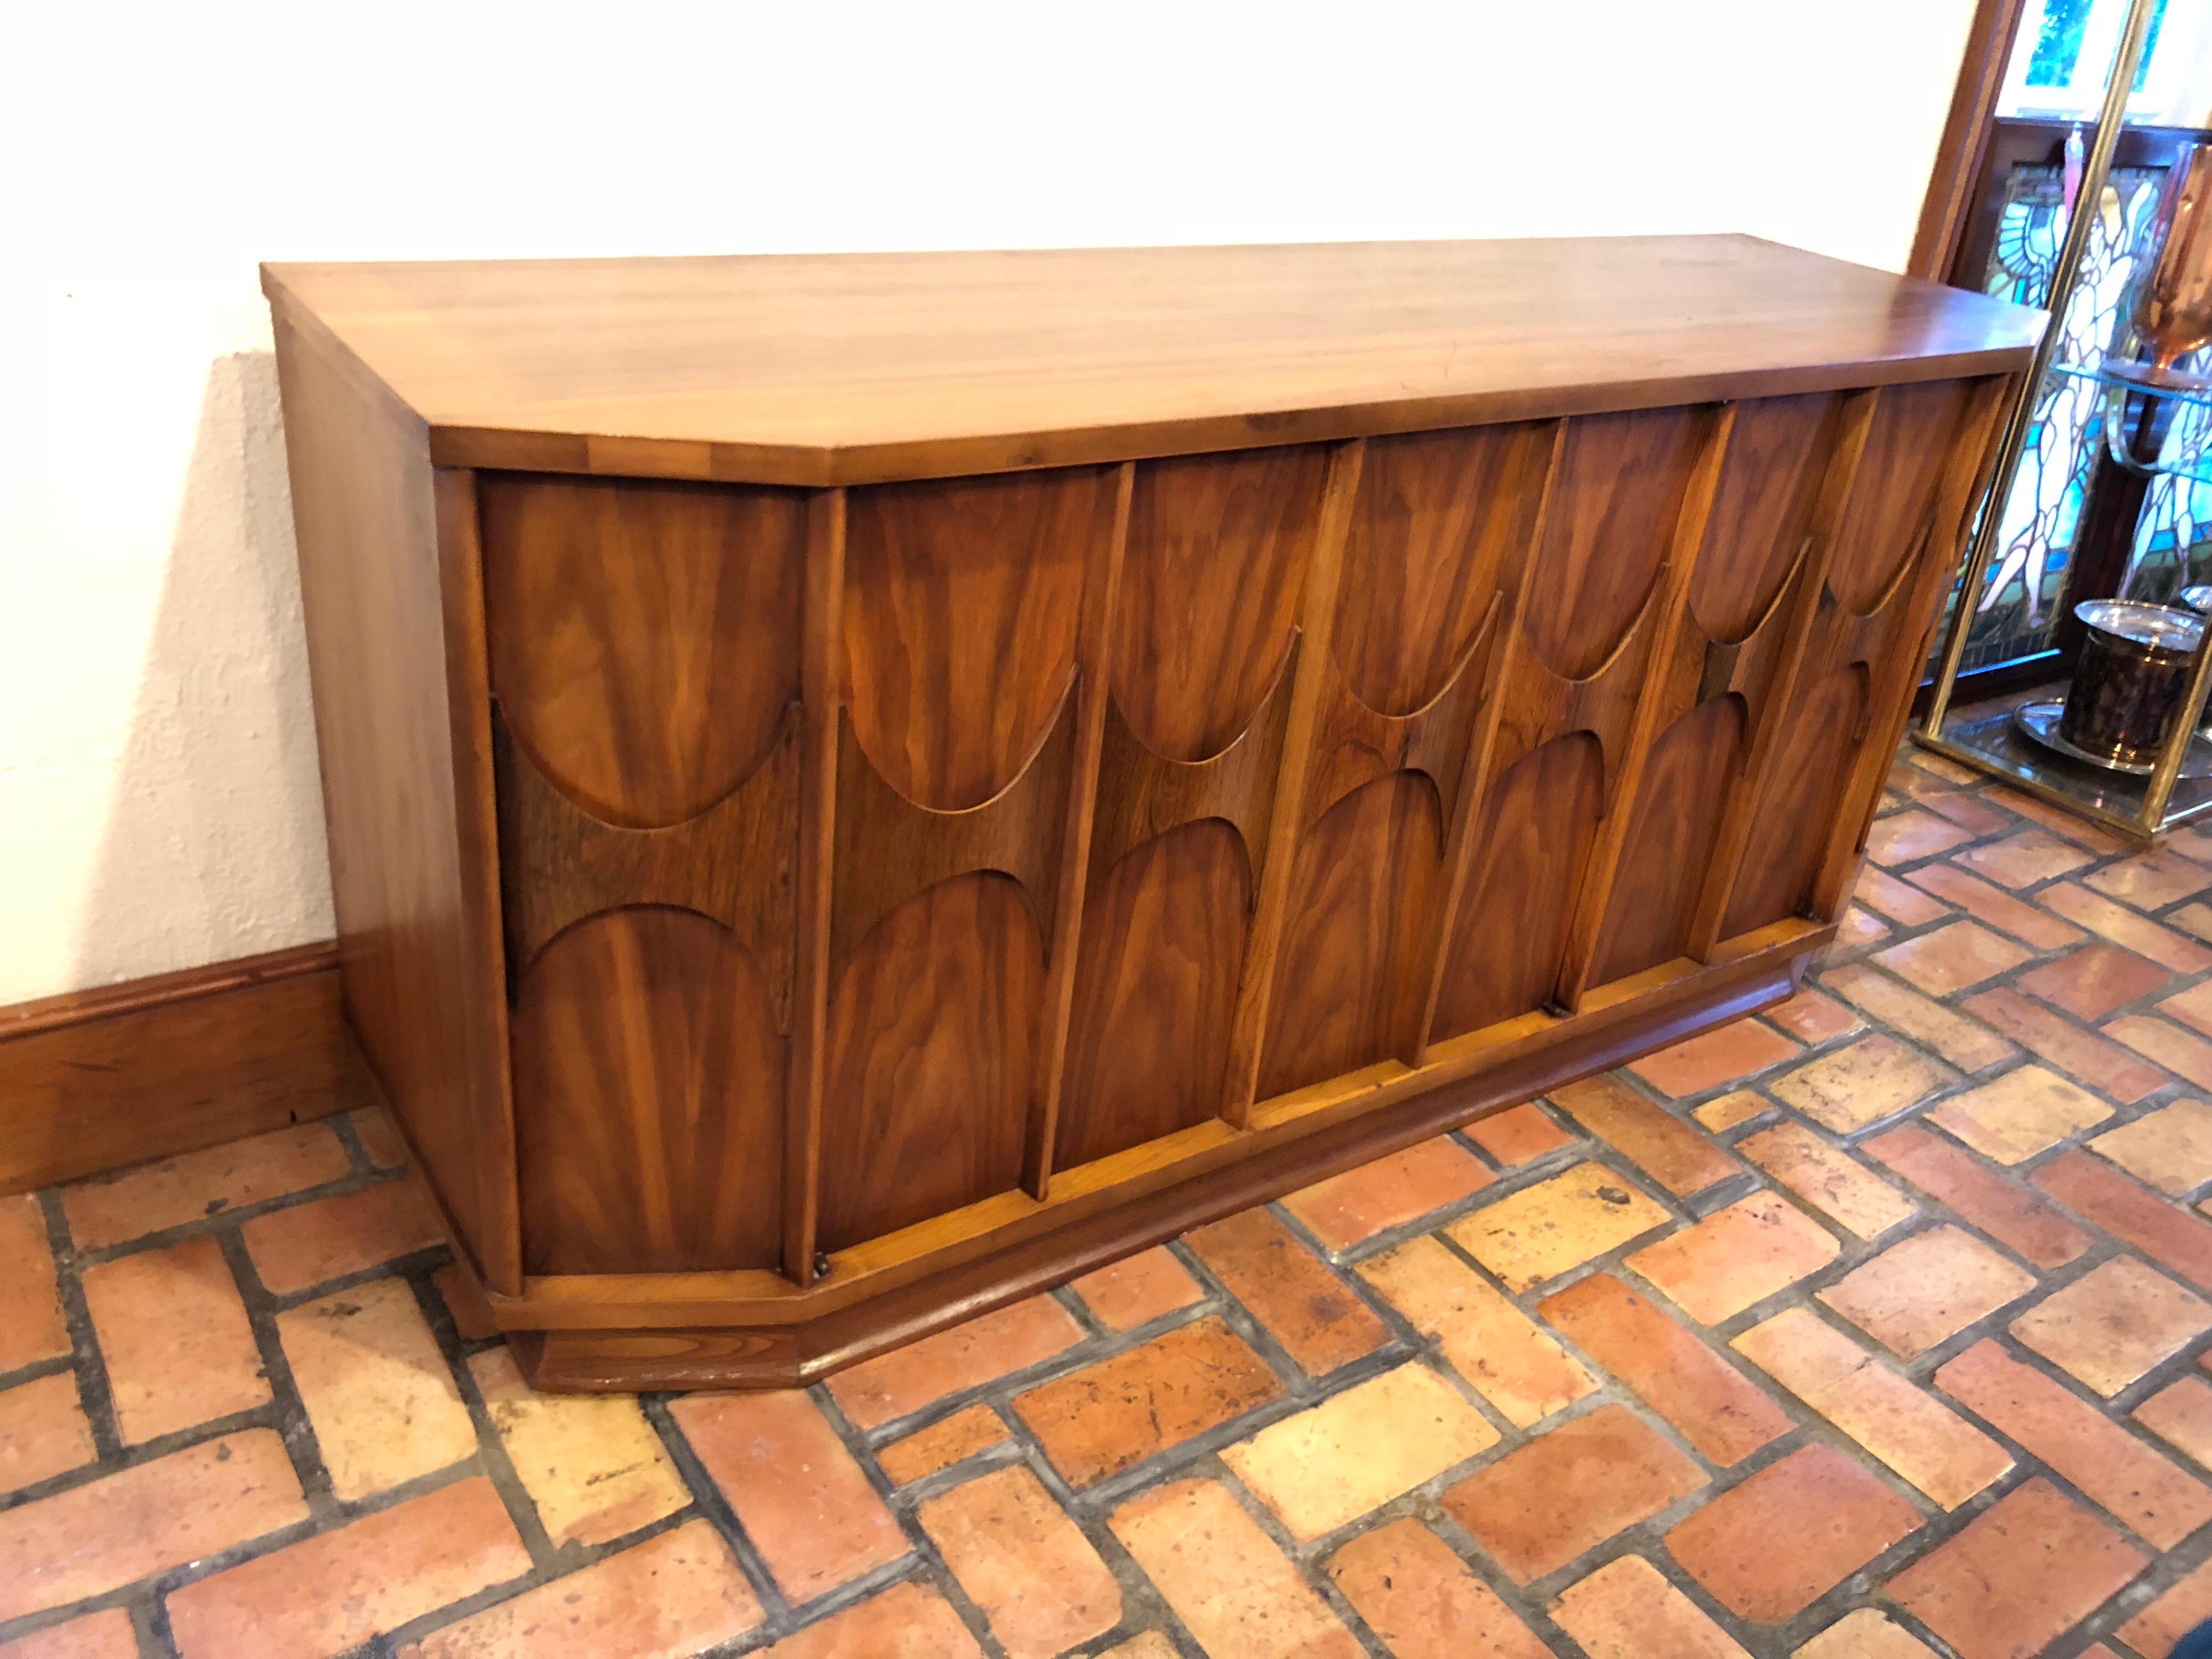 Mid-Century Modern Brutalist credenza in the style of Kent Coffey, Perspecta line. Great foyer or entryway piece. Or use as a credenza for a TV or as a server in your dining room. Use 